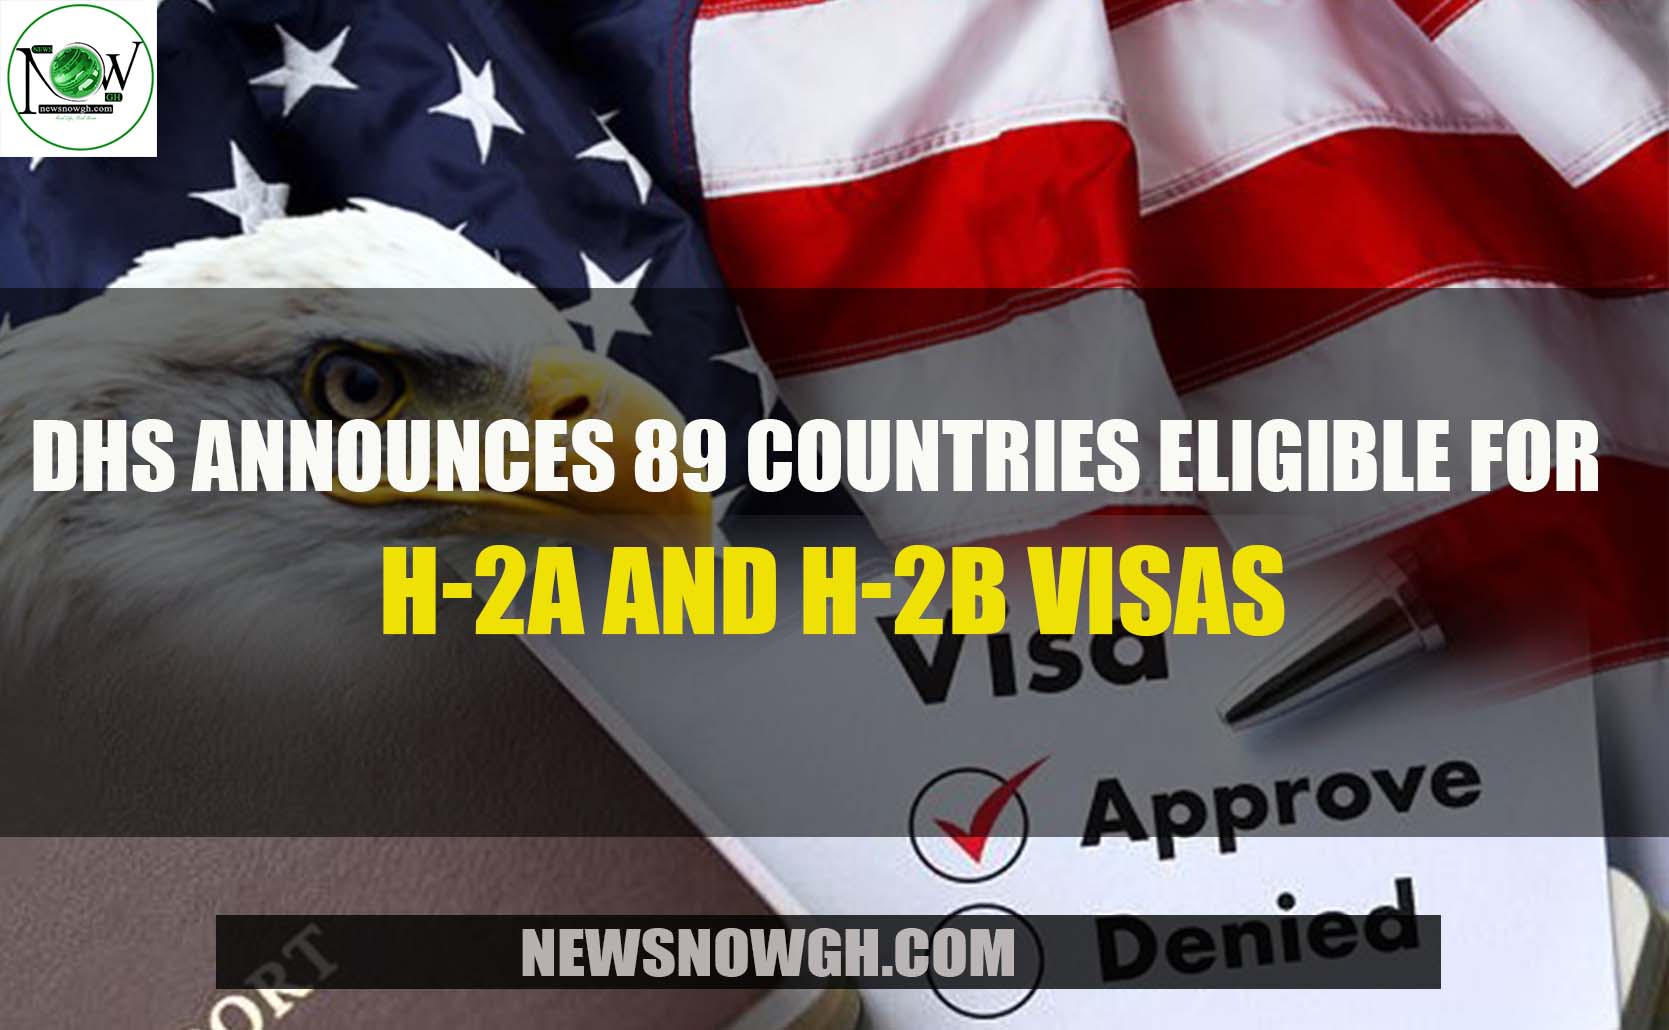 DHS Announces 89 Countries Eligible for H2A and H2B Visa